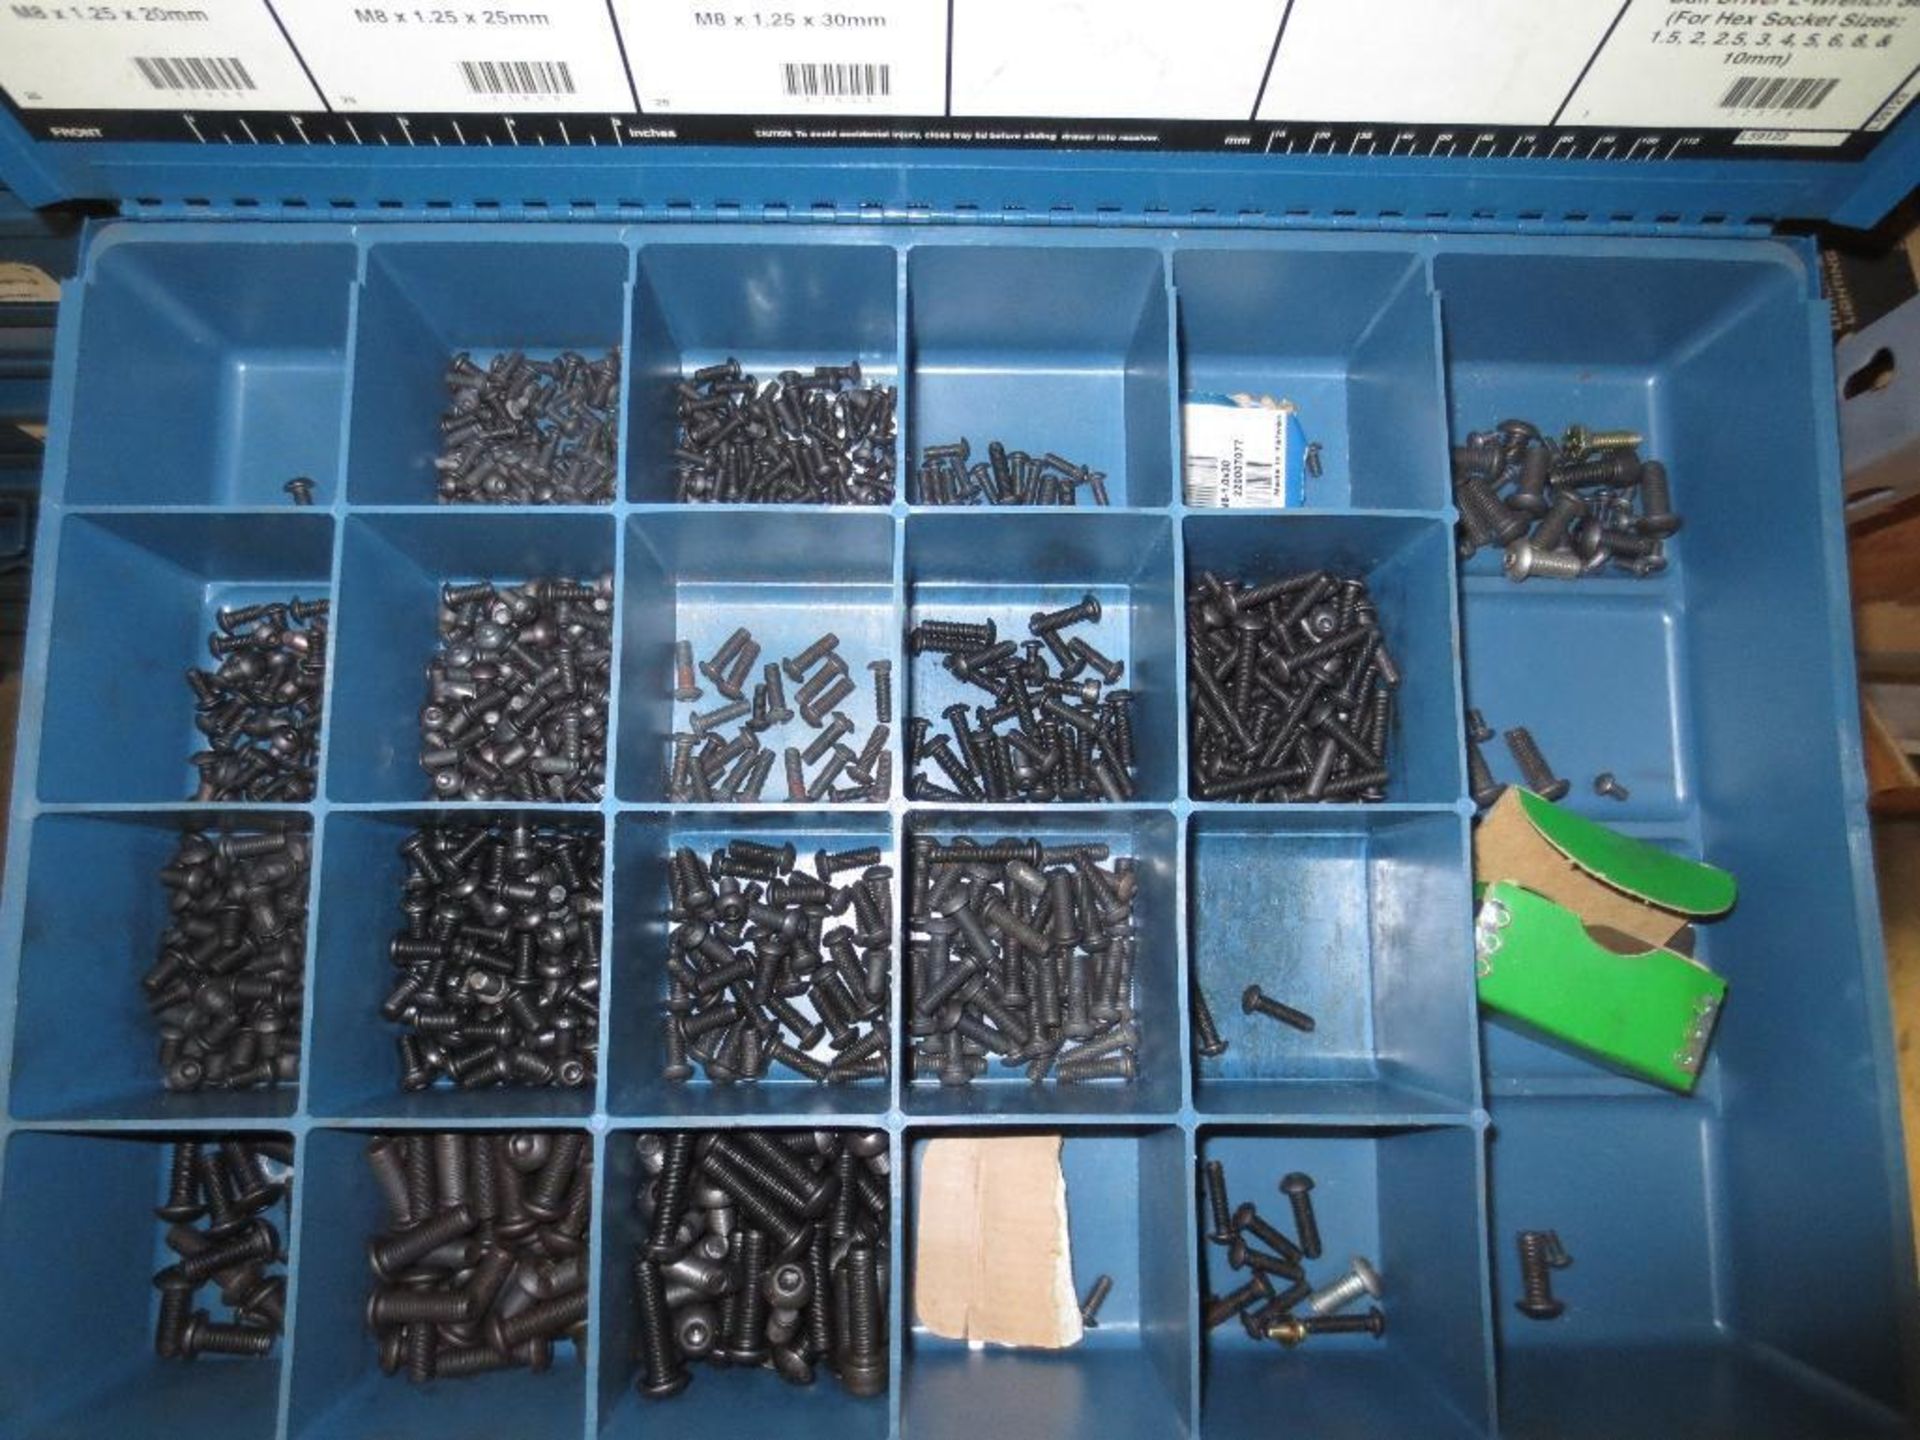 Two Five Drawer Compartment Cabinets With Misc. Contents Of Screws, Nuts, Washers - Image 5 of 10